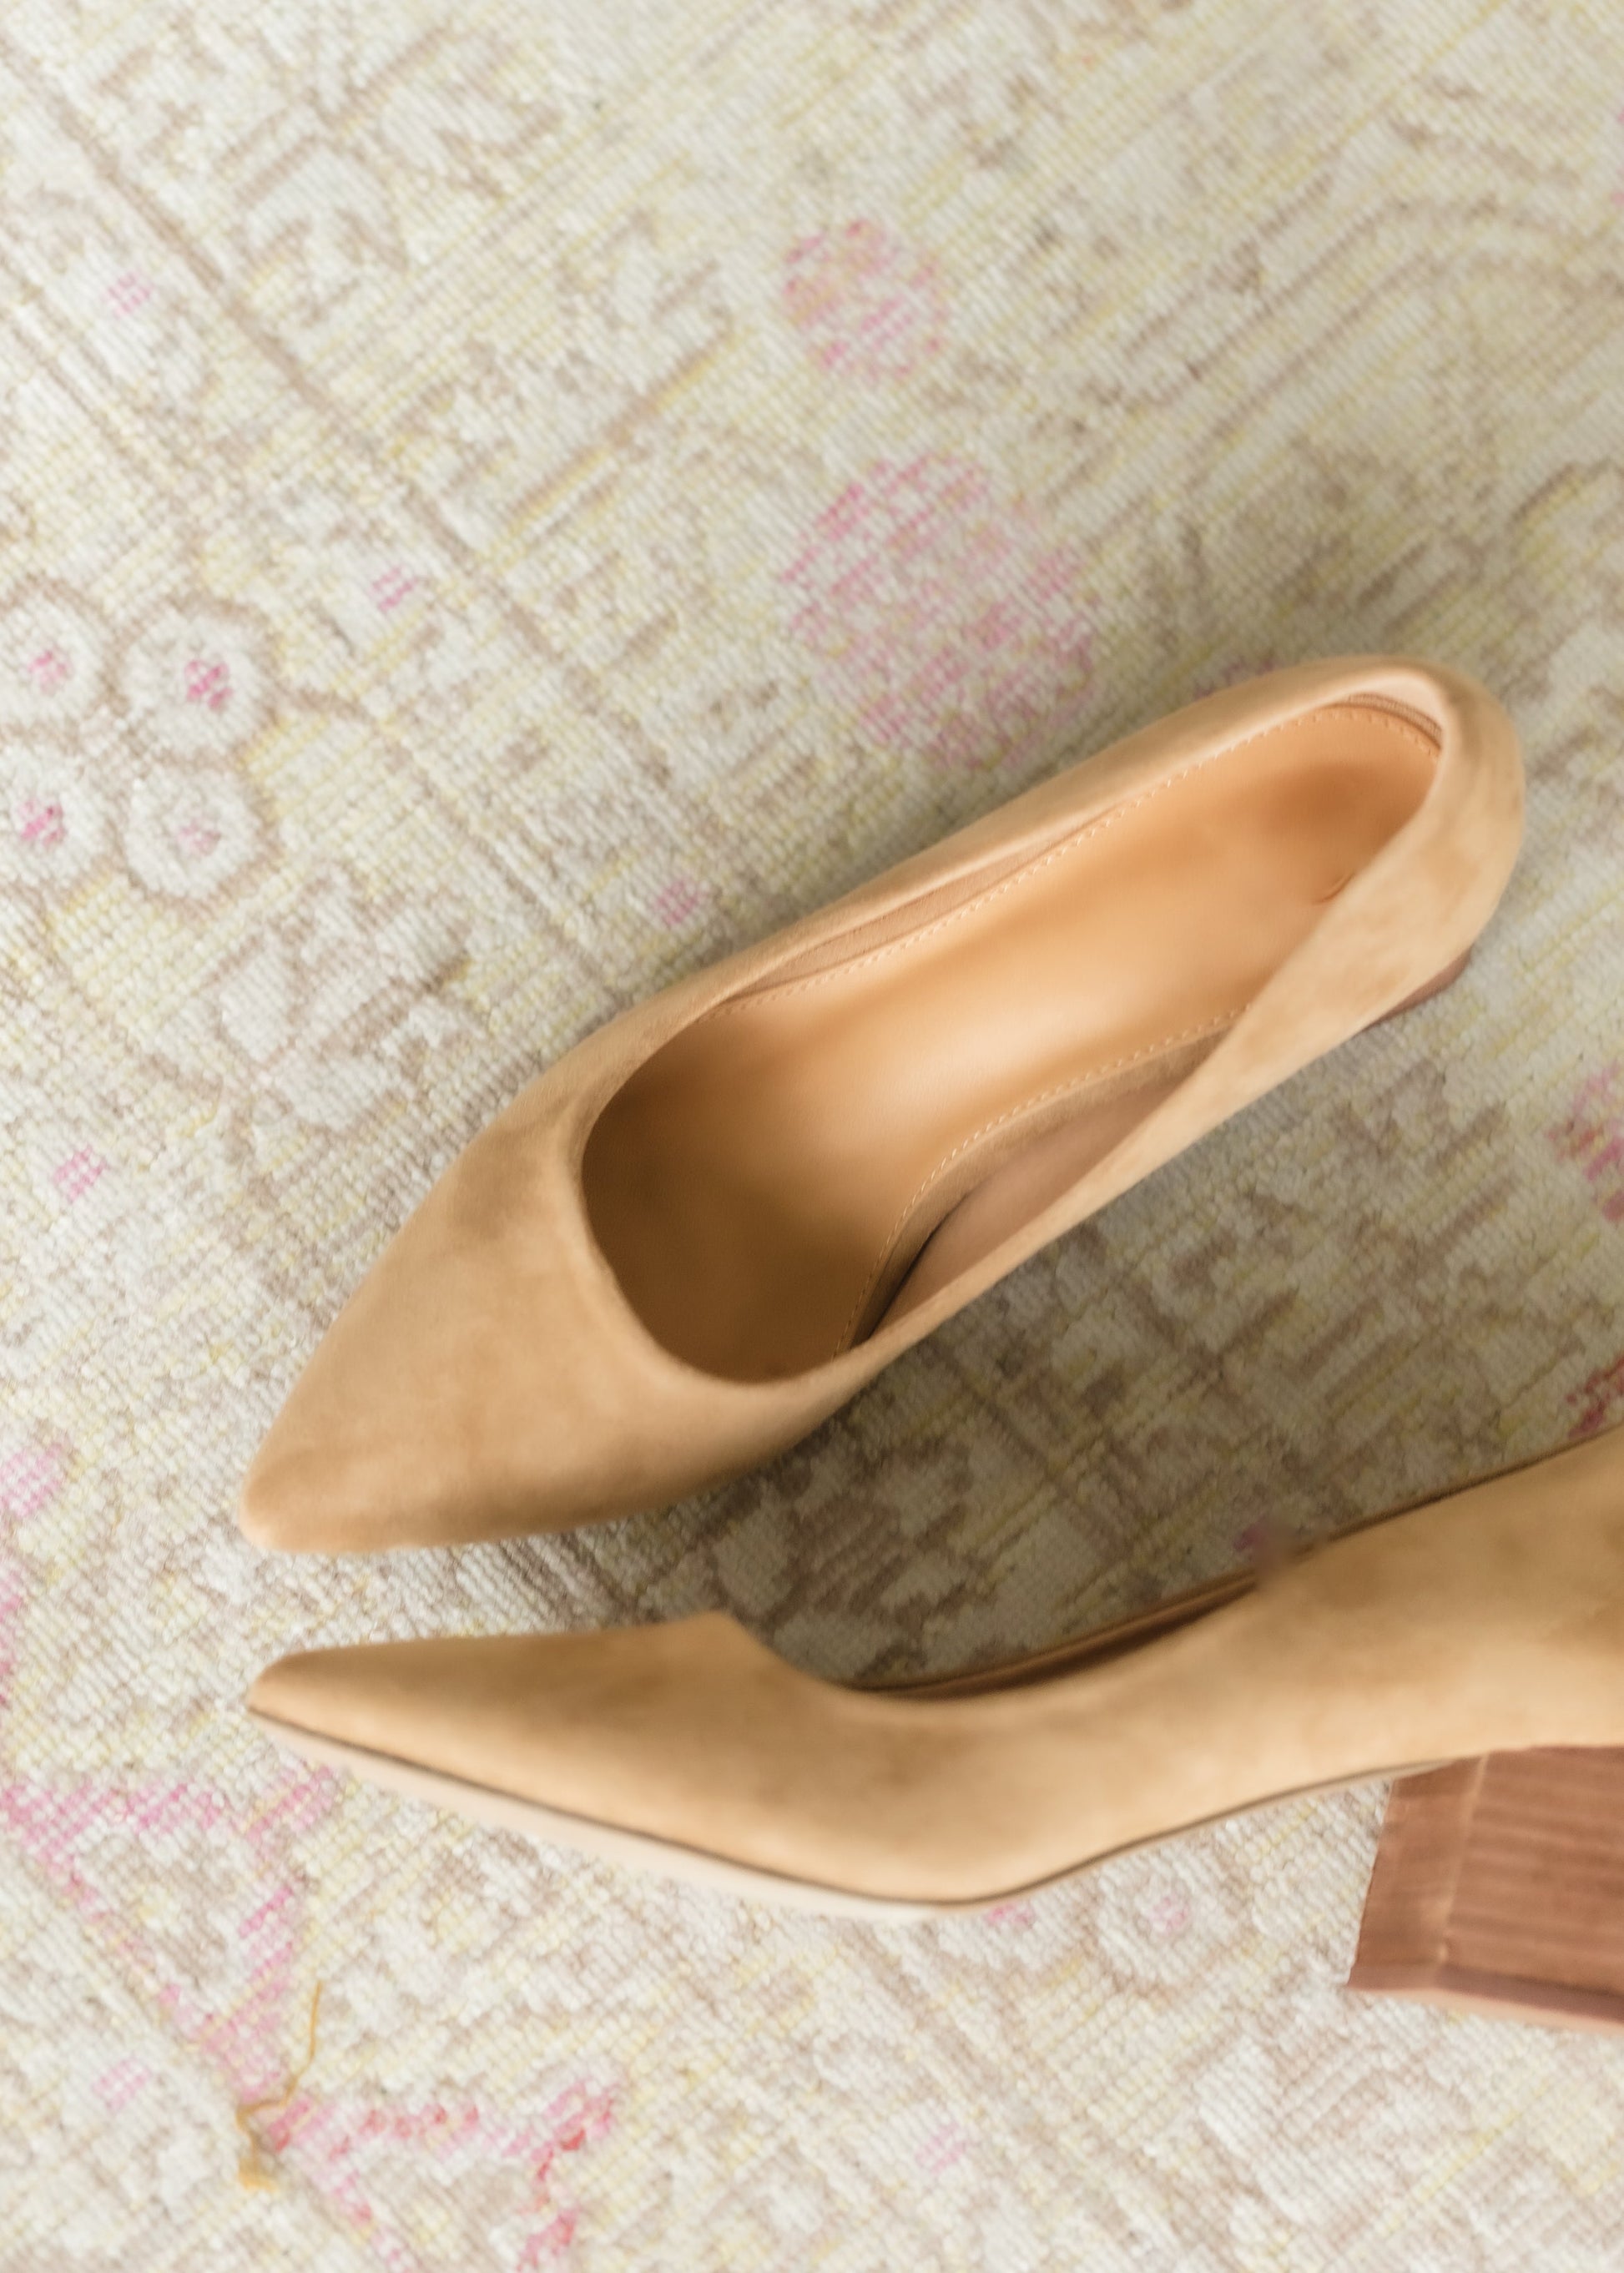 Taupe Pointy Toe Wooden Heels - FINAL SALE Shoes